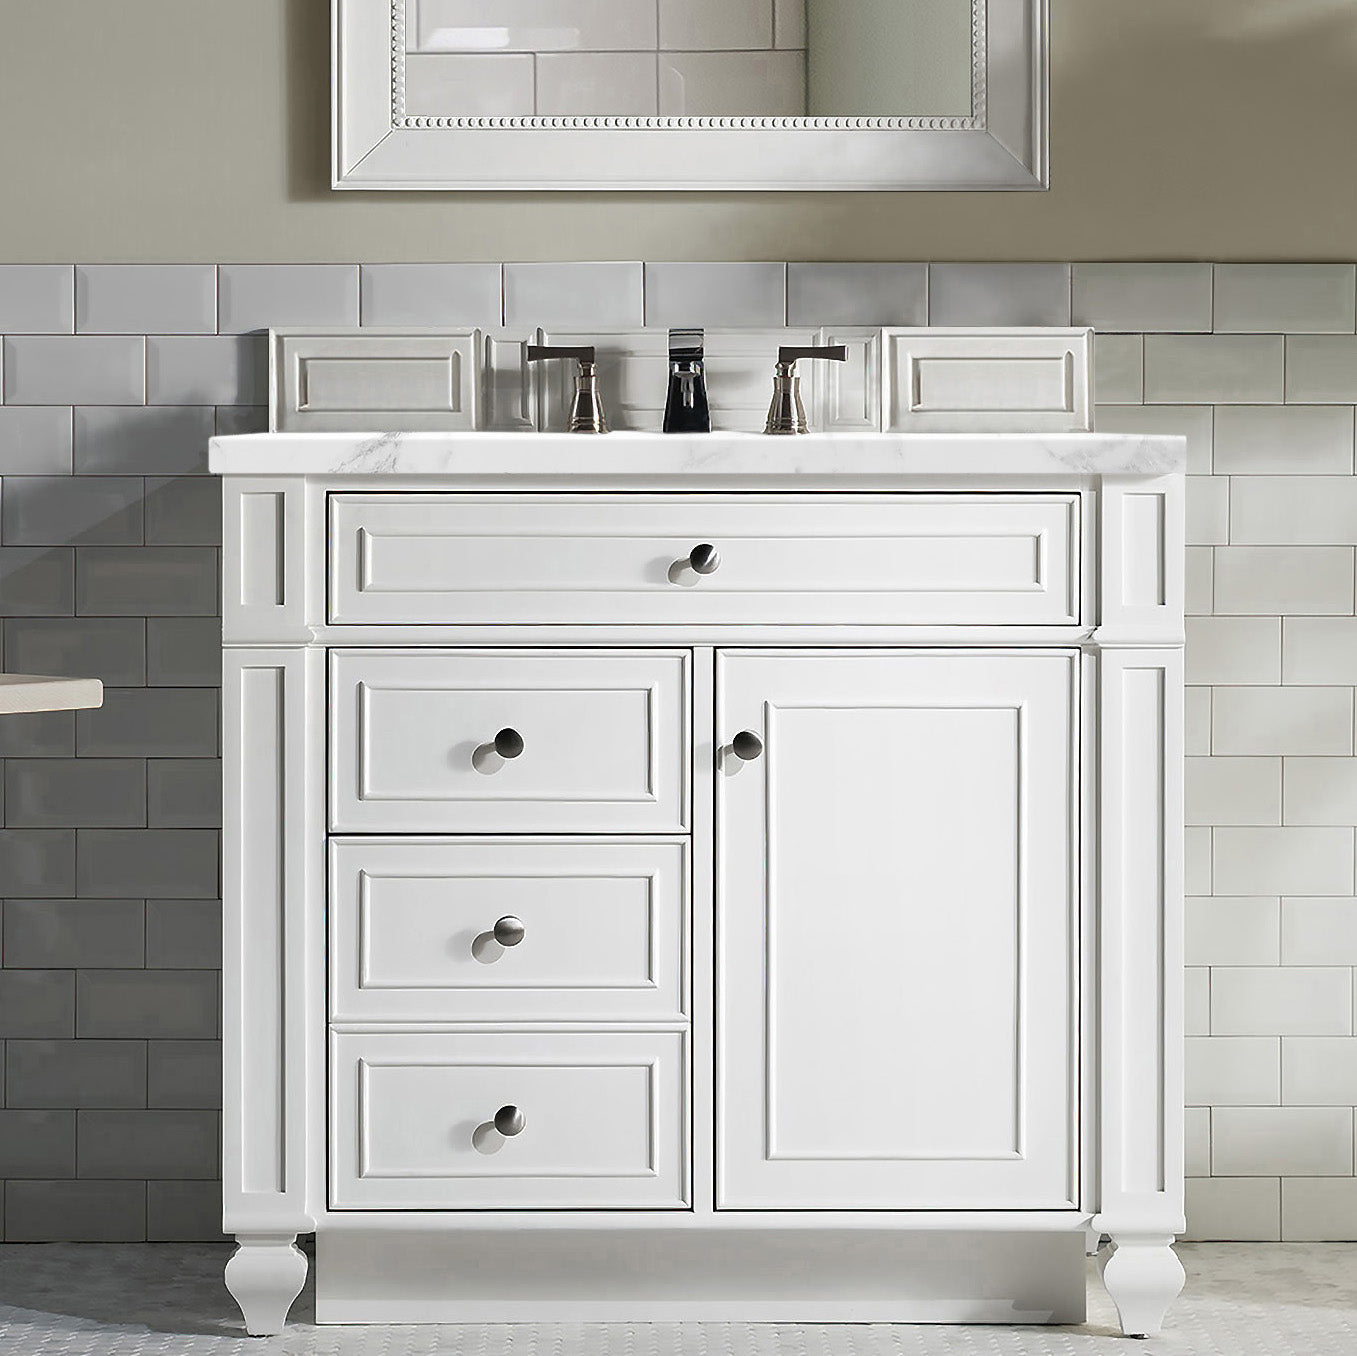 James Martin Vanities Bristol Collection 36 in. Single Vanity in Bright White with Countertop Options 